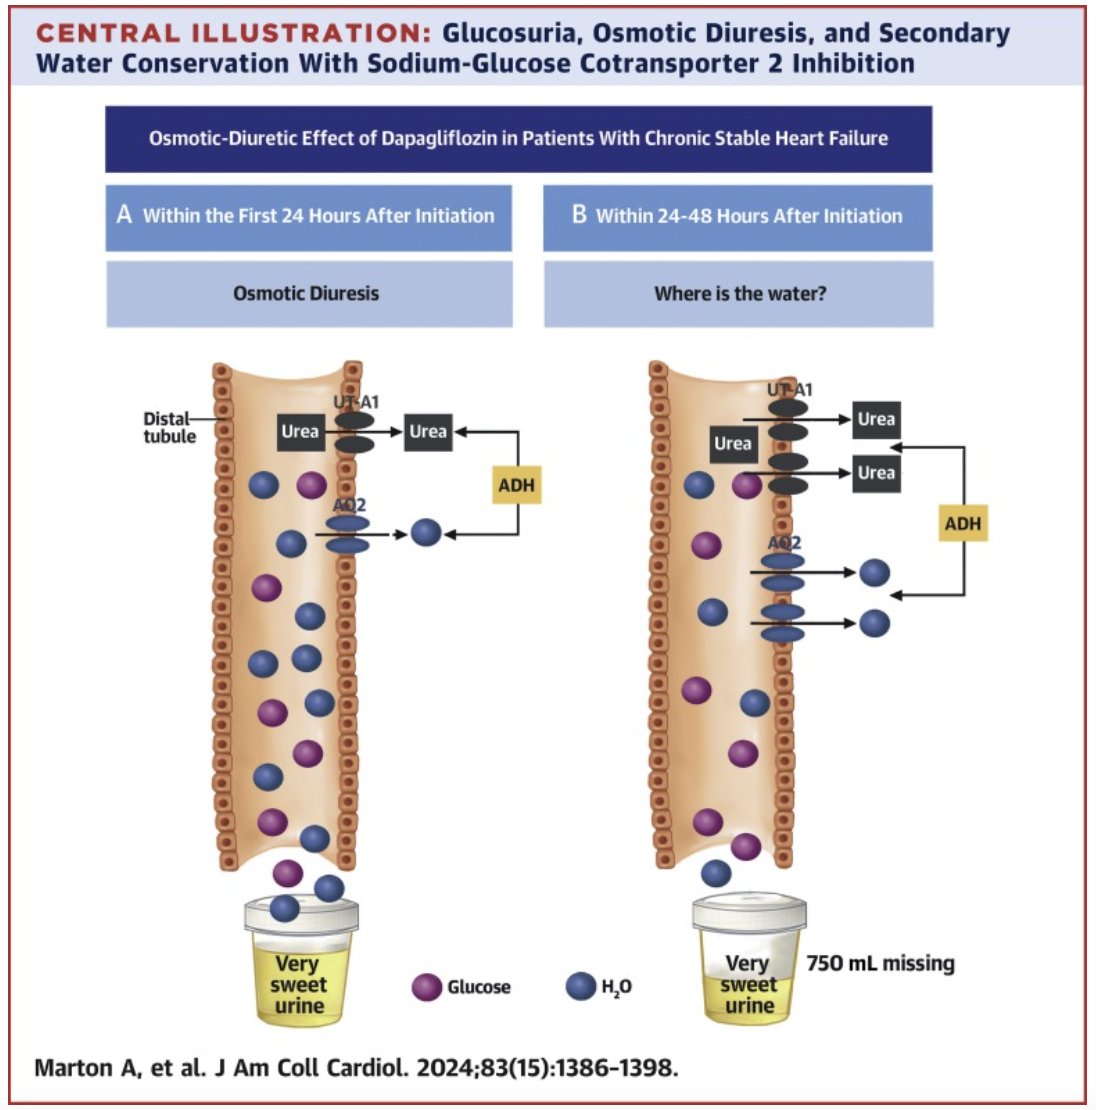 New from Dr Jens Titze and colleagues @dukeNUS in @JACCJournals Water Conservation Overrides Osmotic Diuresis During SGLT2 Inhibition in Patients With Heart Failure sciencedirect.com/science/articl…